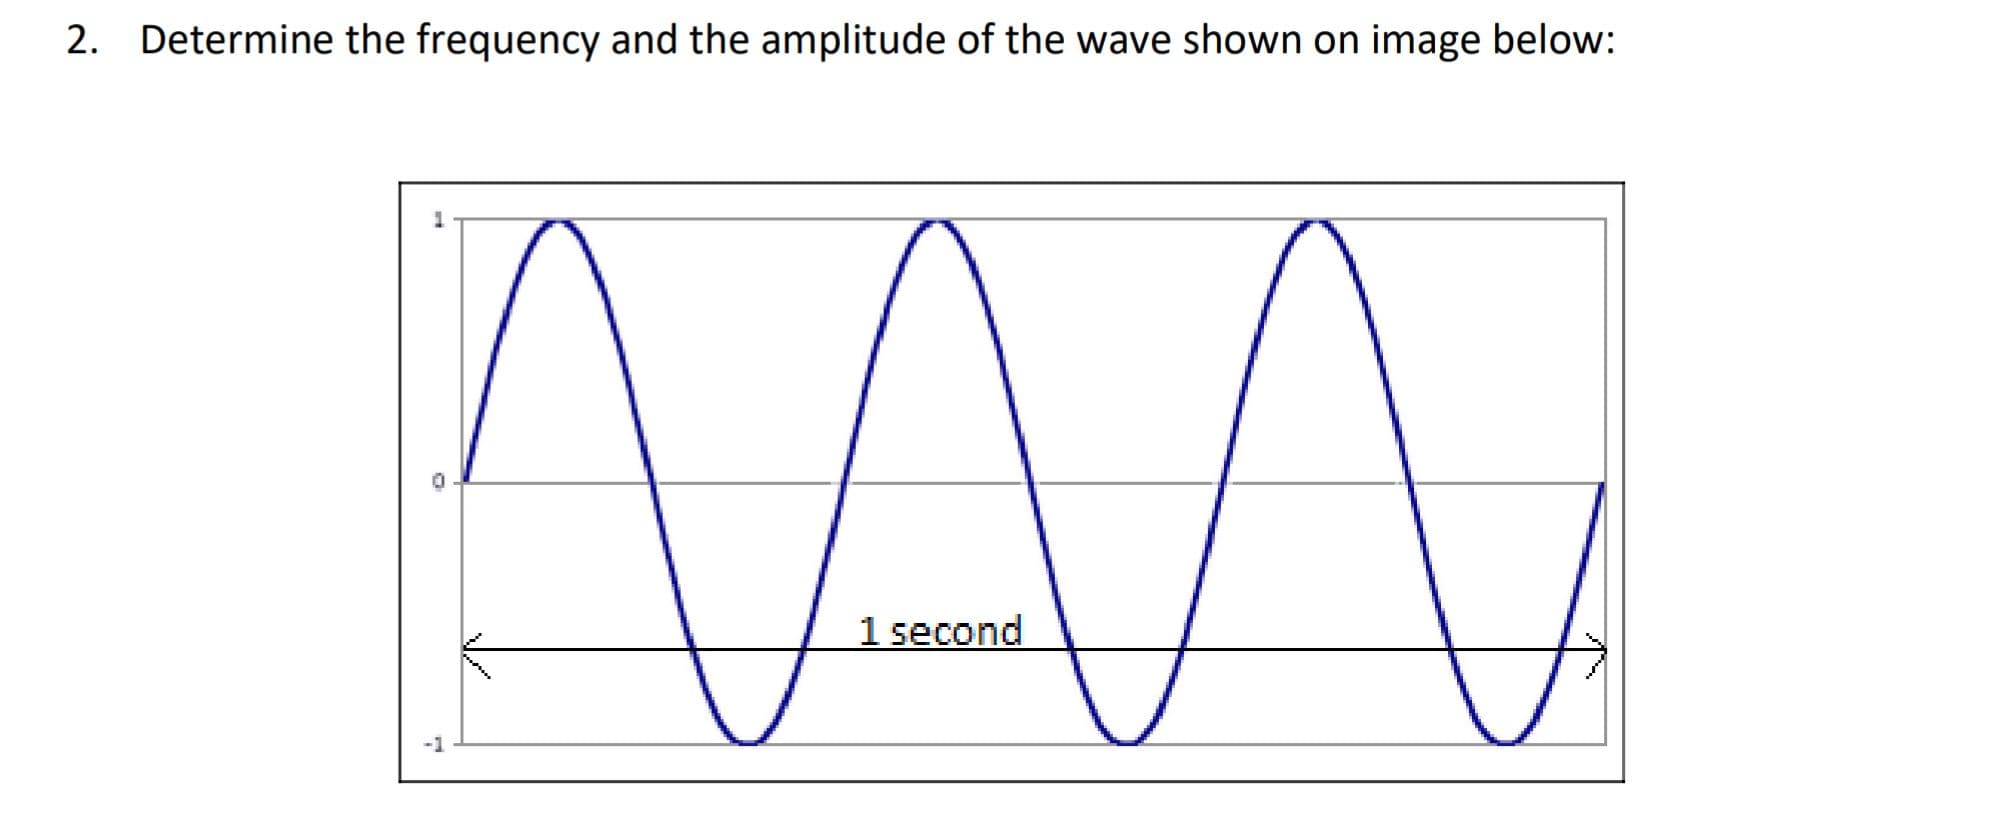 2. Determine the frequency and the amplitude of the wave shown on image below:
